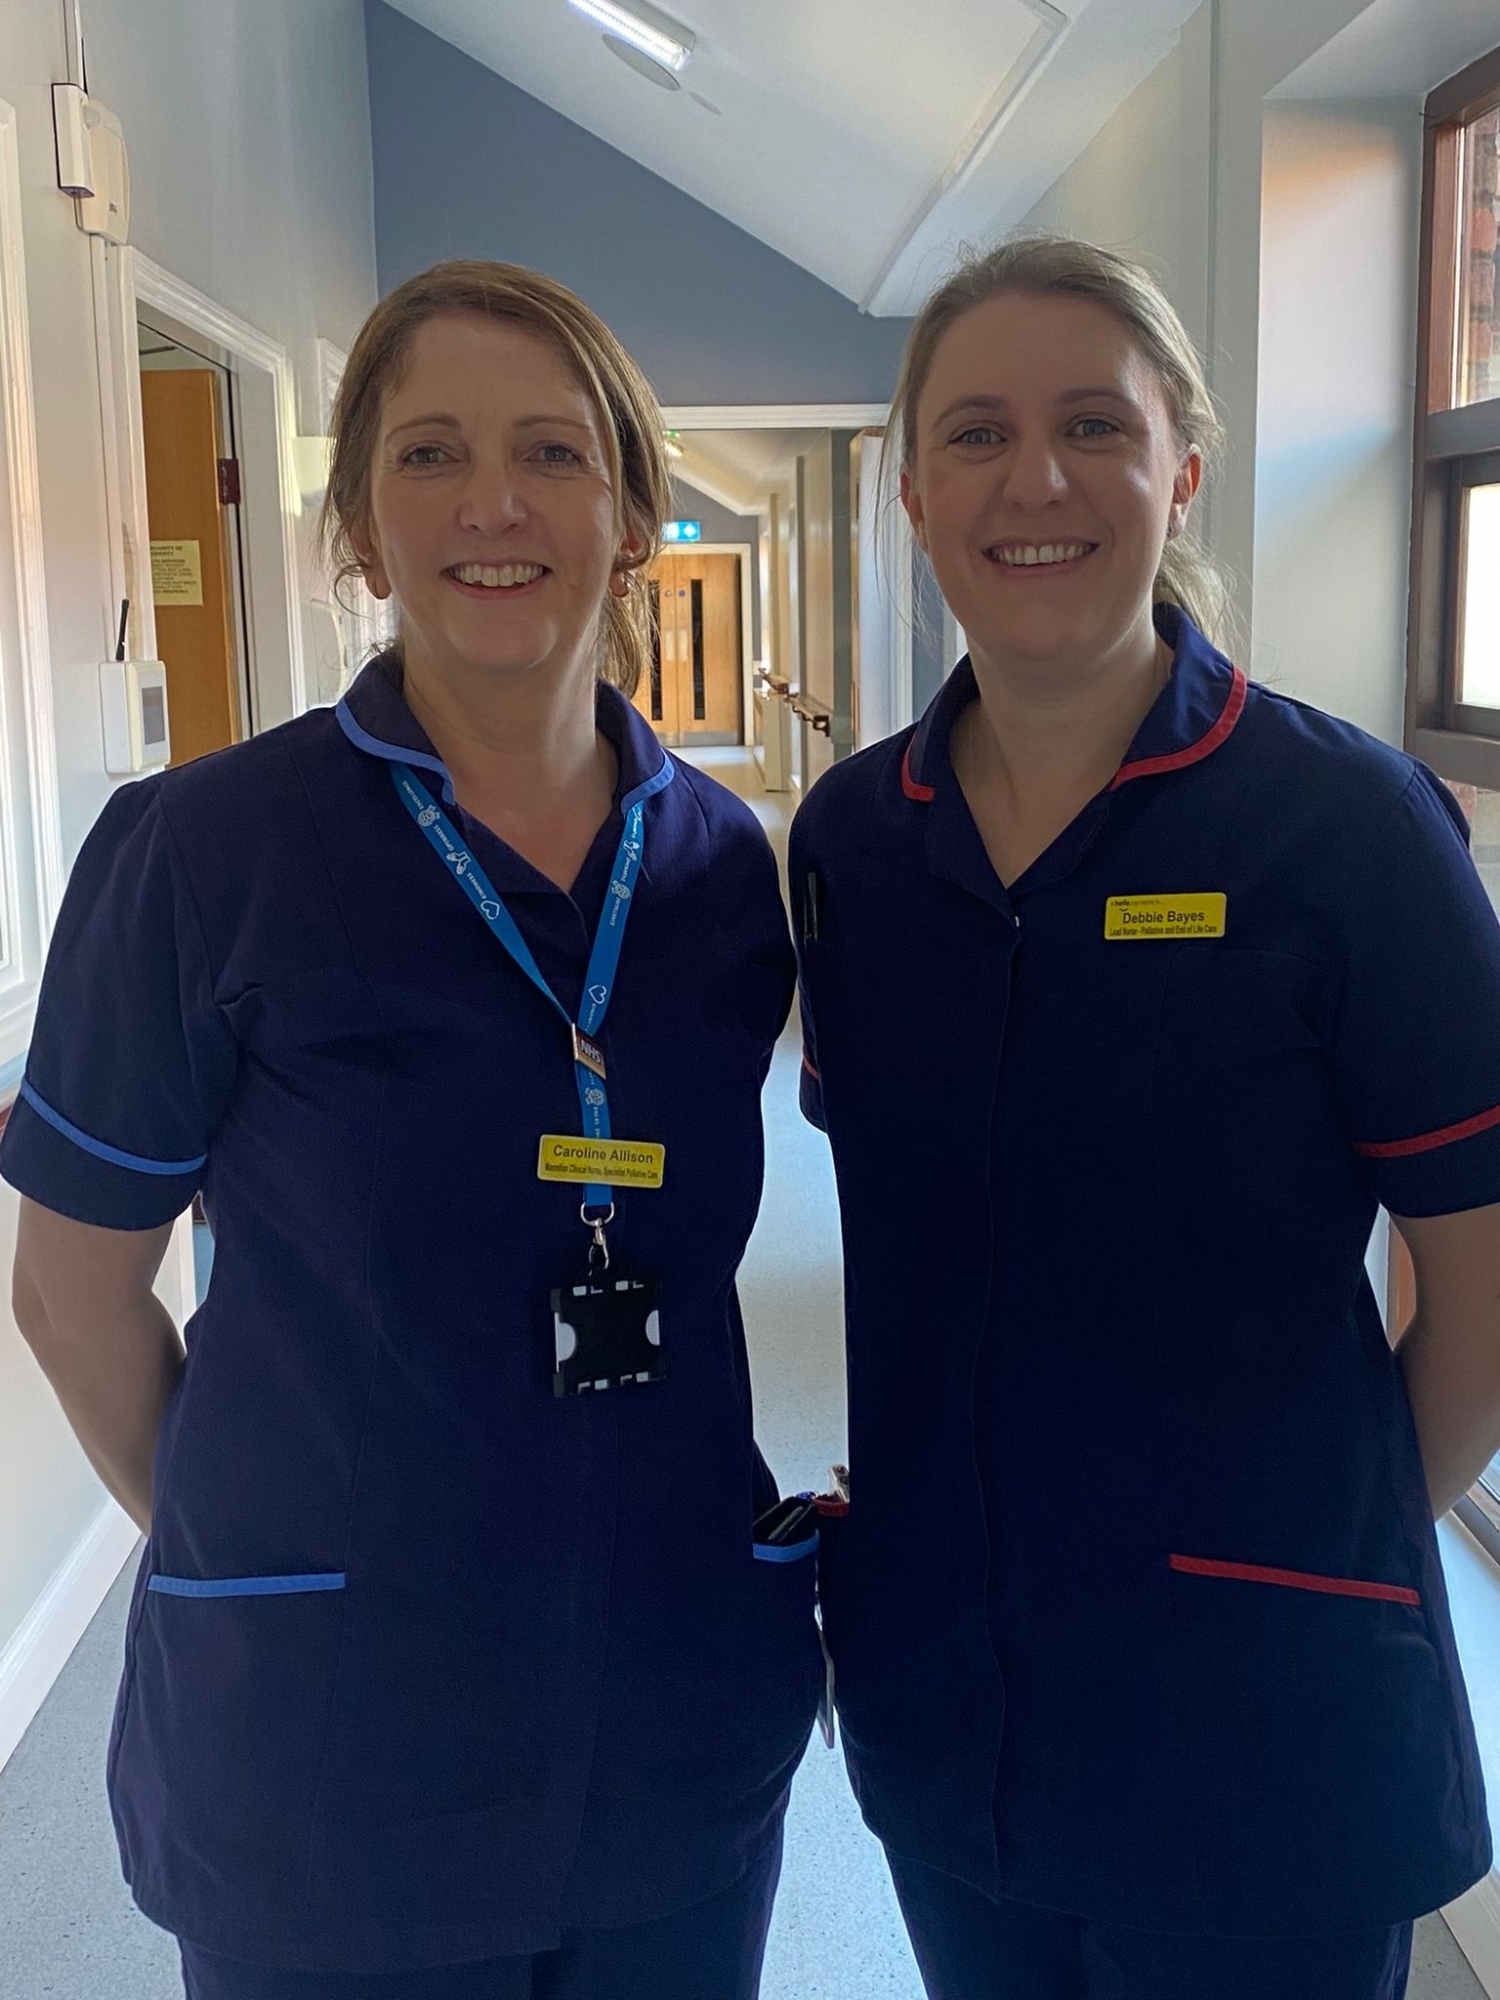 Caroline and Debbie, palliative nurses at the Trust, standing on a hospital corridor in their work uniforms.